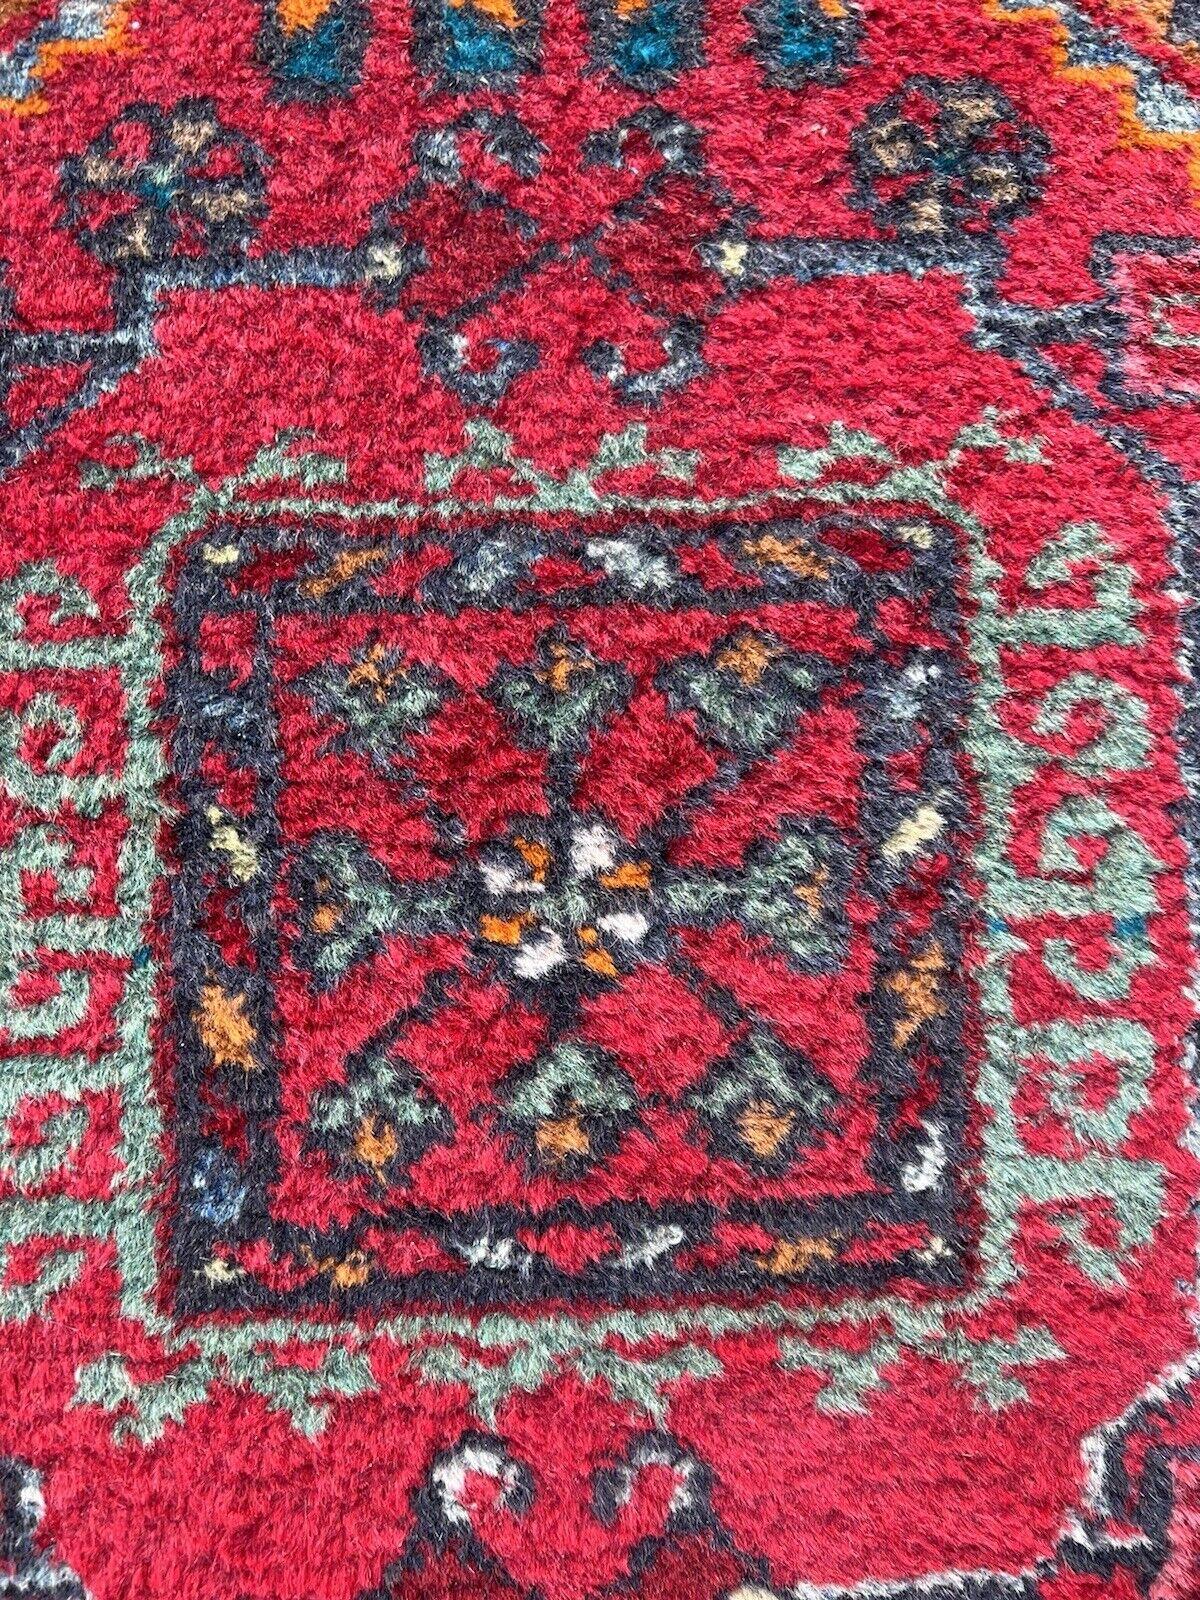 Handmade Vintage Persian Style Hamadan Rug 2.7' x 4.3', 1970s - 1S60 In Good Condition For Sale In Bordeaux, FR